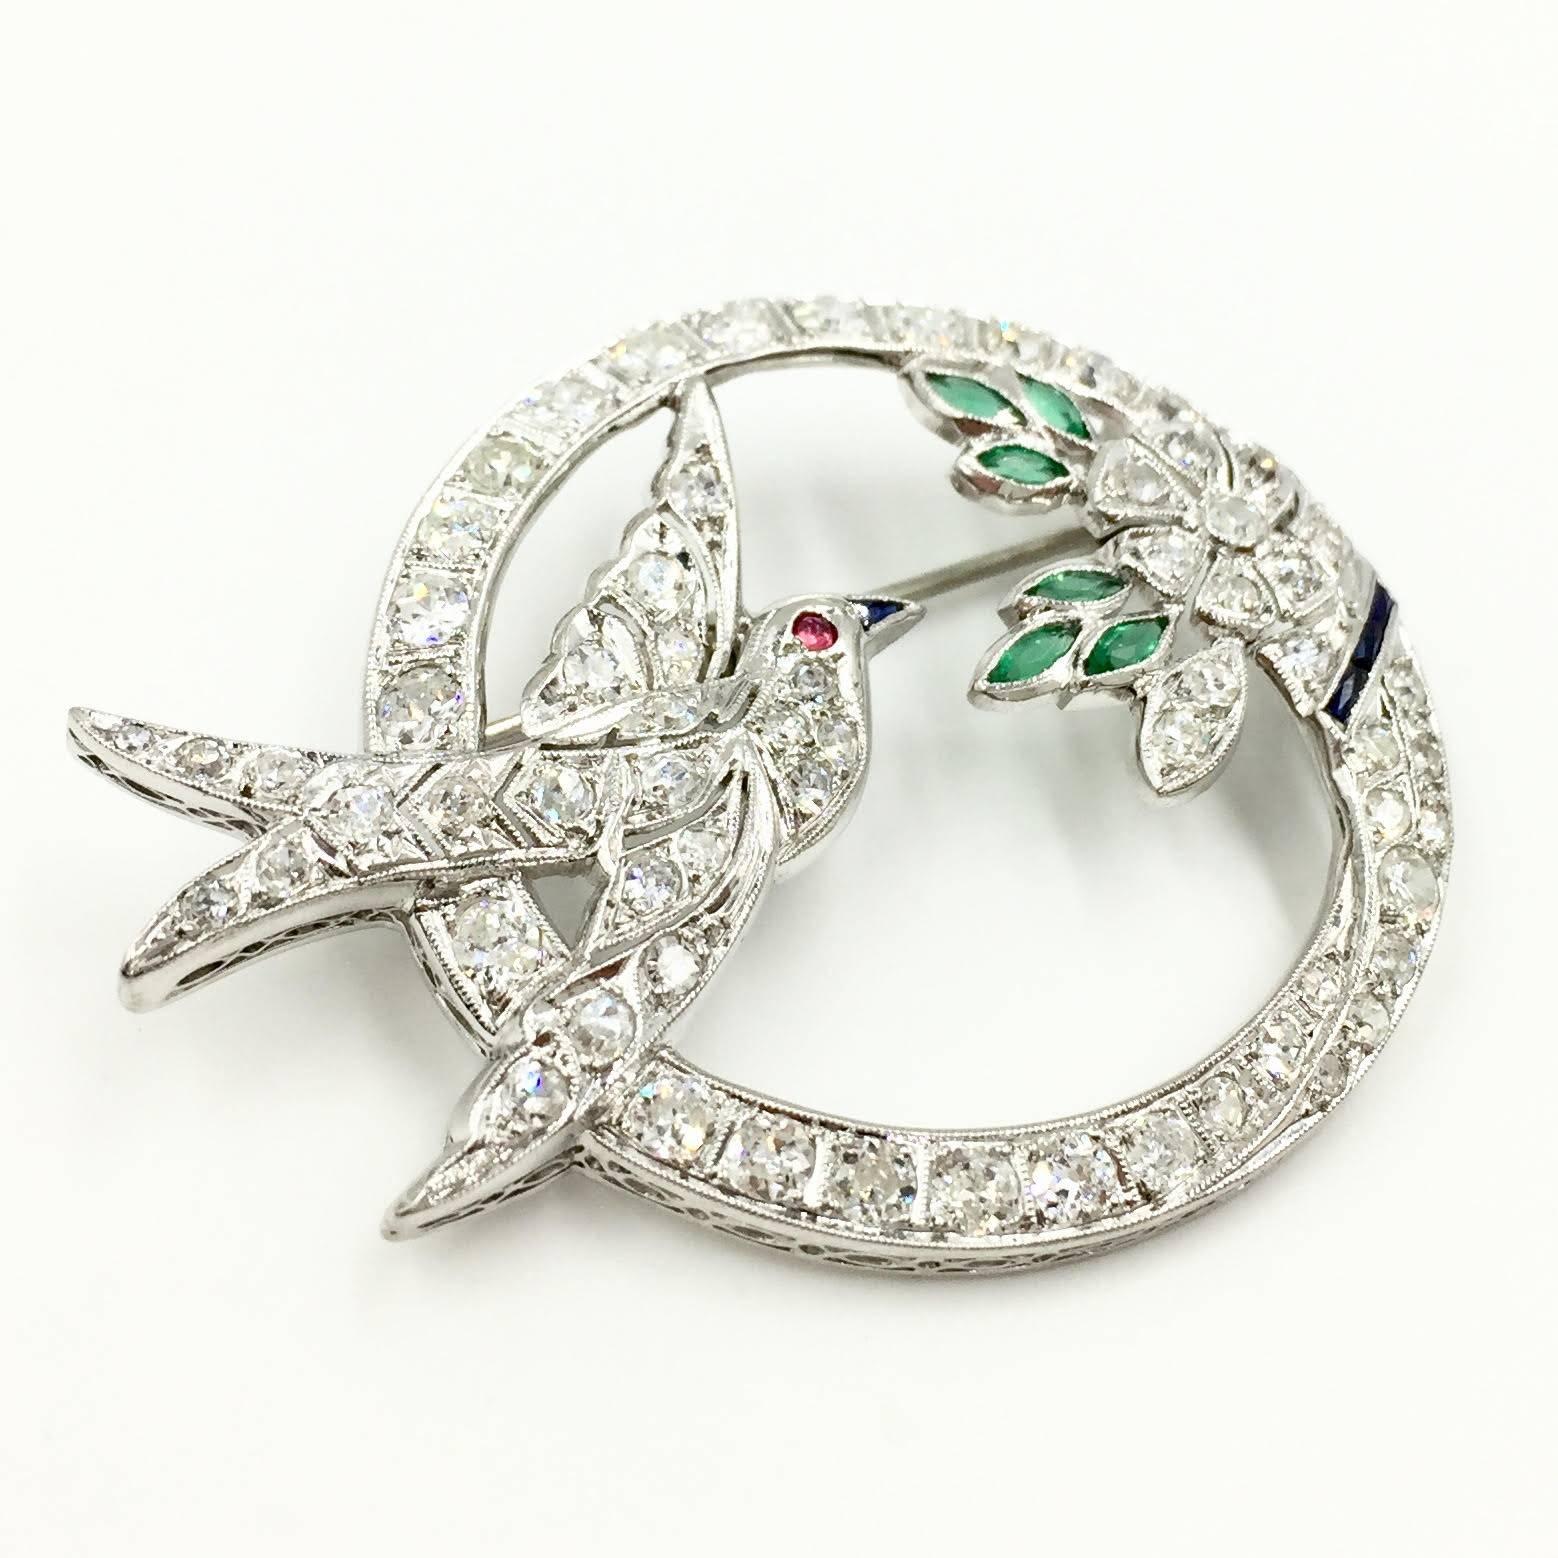 Circa 1950's, this beautiful Art Deco Style detailed brooch is adorned with diamonds, emeralds, sapphires and a ruby. Perfect for a jewelry lover. This interesting piece can easily be converted to a pendant.